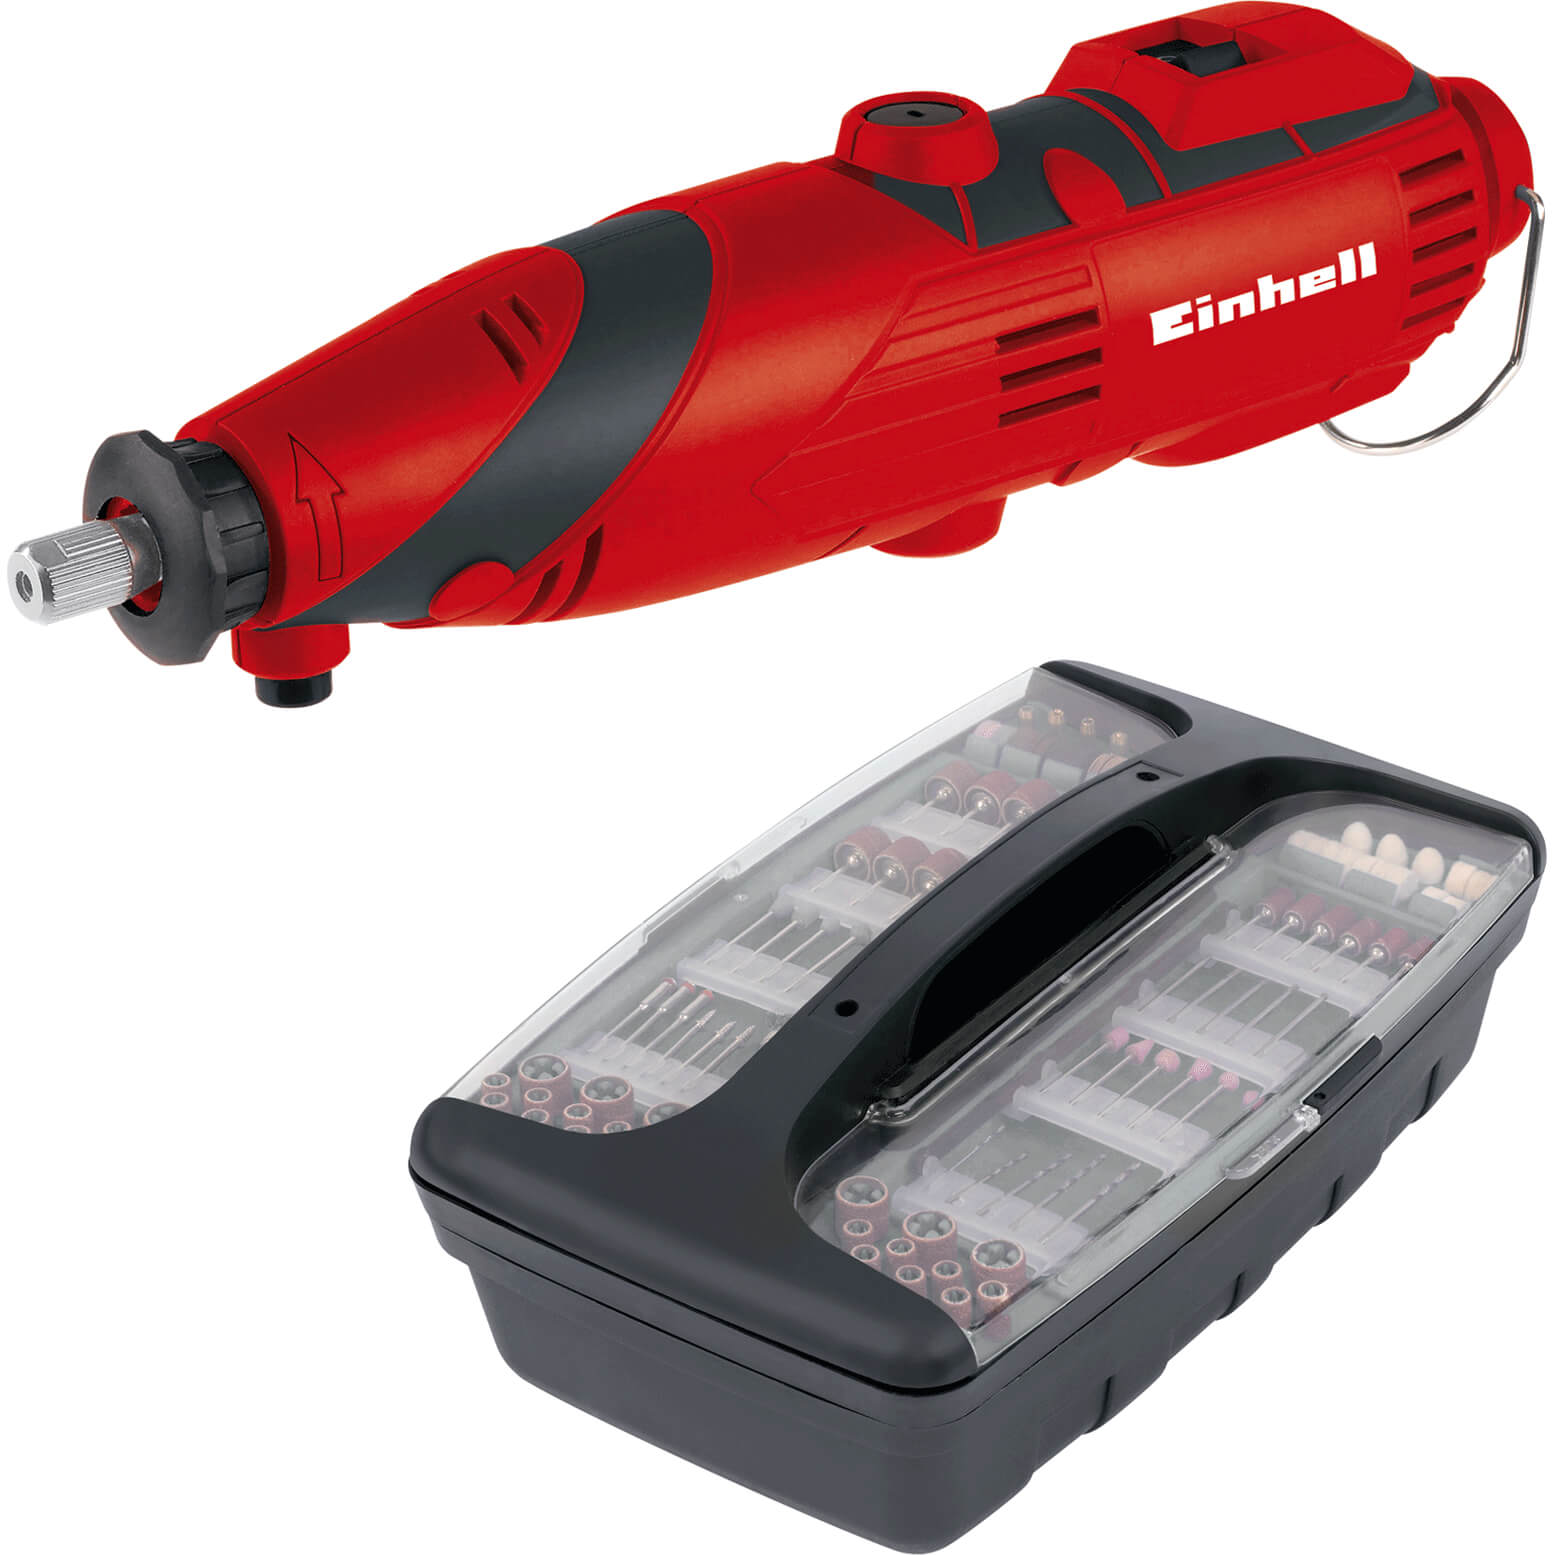 Photo of Einhell Tc-mg 135 E Grinding And Engraving Rotary Tool Kit 240v